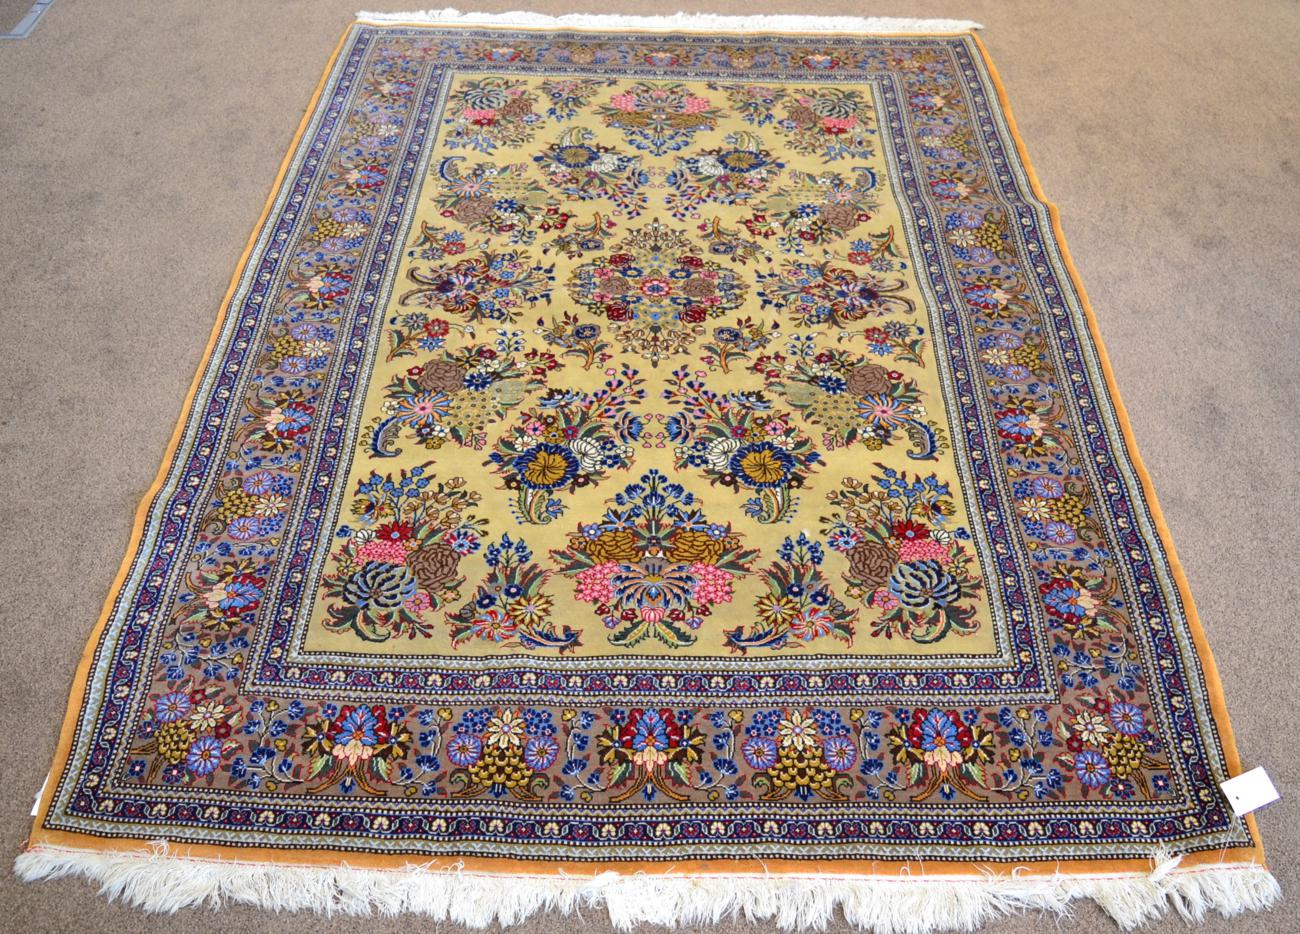 Finely Woven Tabriz Rug Iranian Azerbaijan The camel field with naturalistic floral sprays